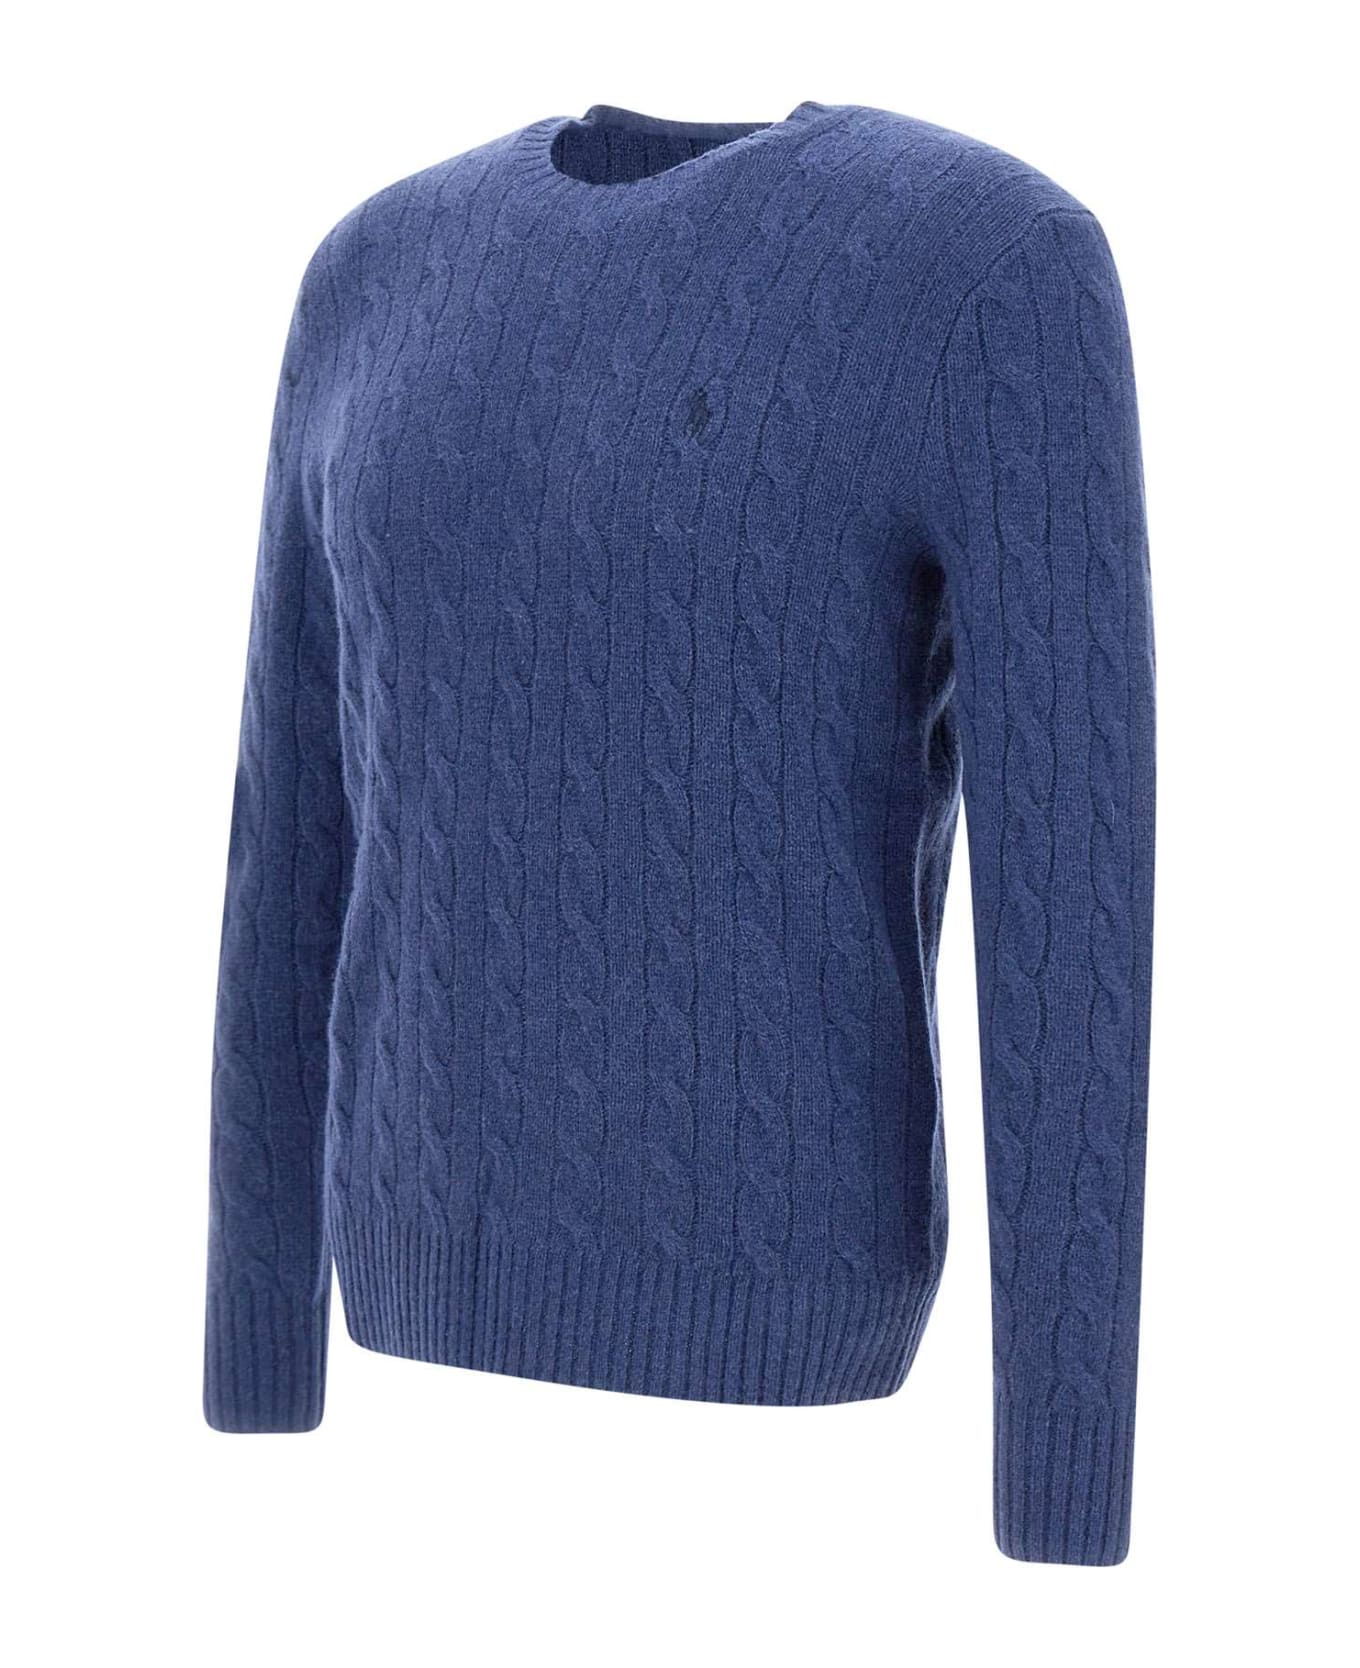 Polo Ralph Lauren Wool And Cashmere Sweater - Blue